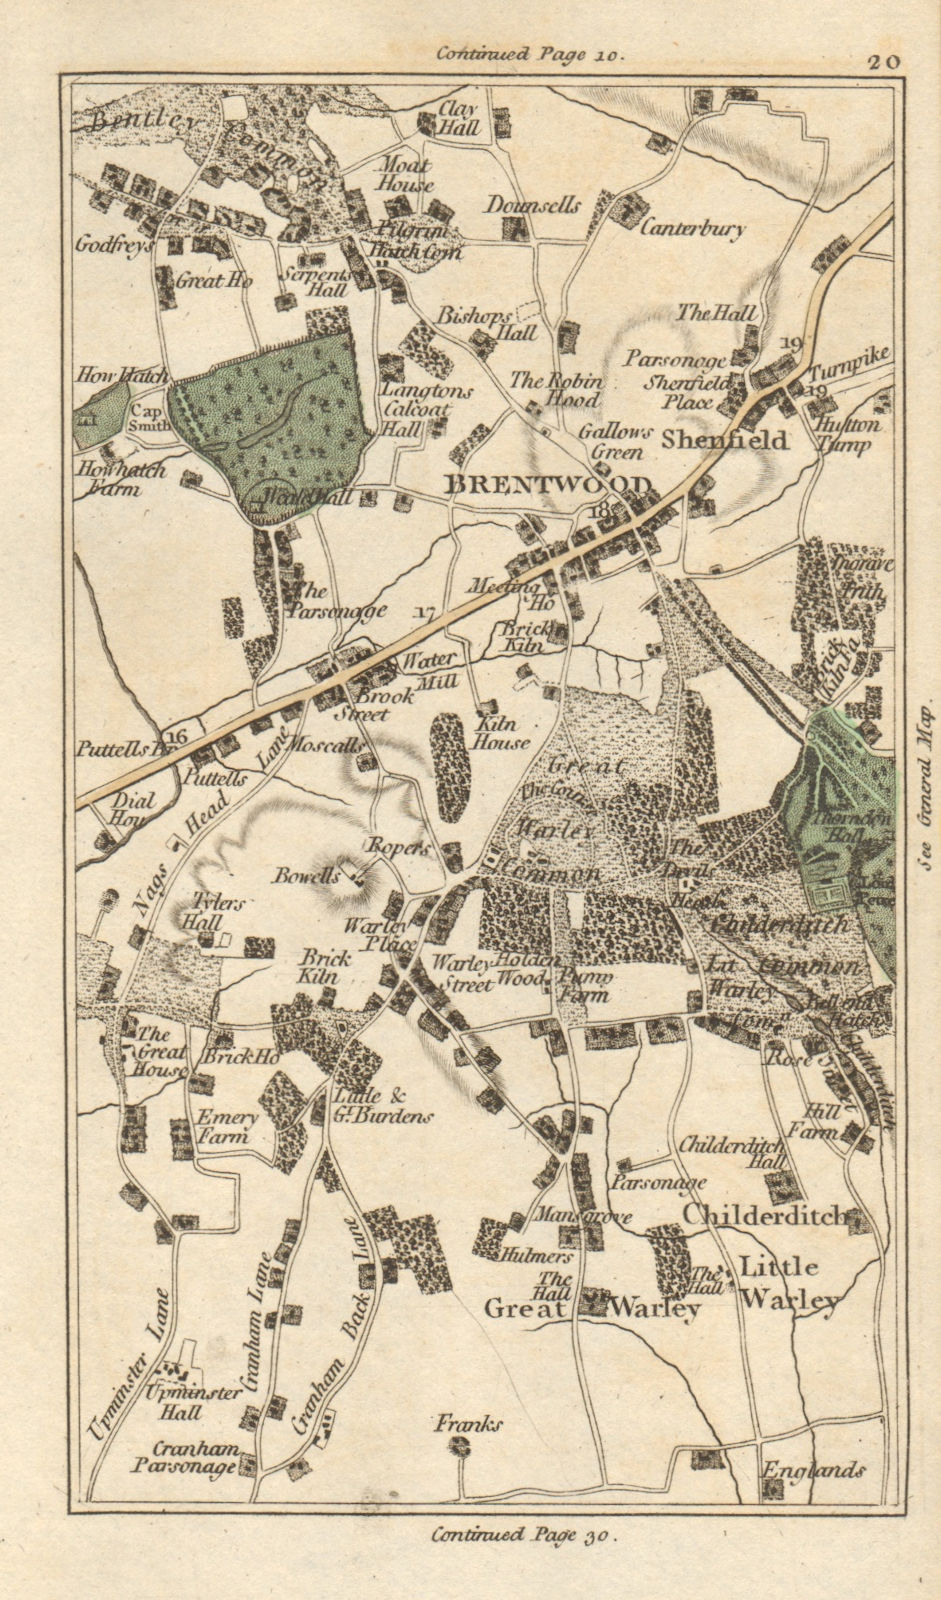 Associate Product BRENTWOOD Upminster Little Great Warley Childerditch Shenfield CARY 1786 map